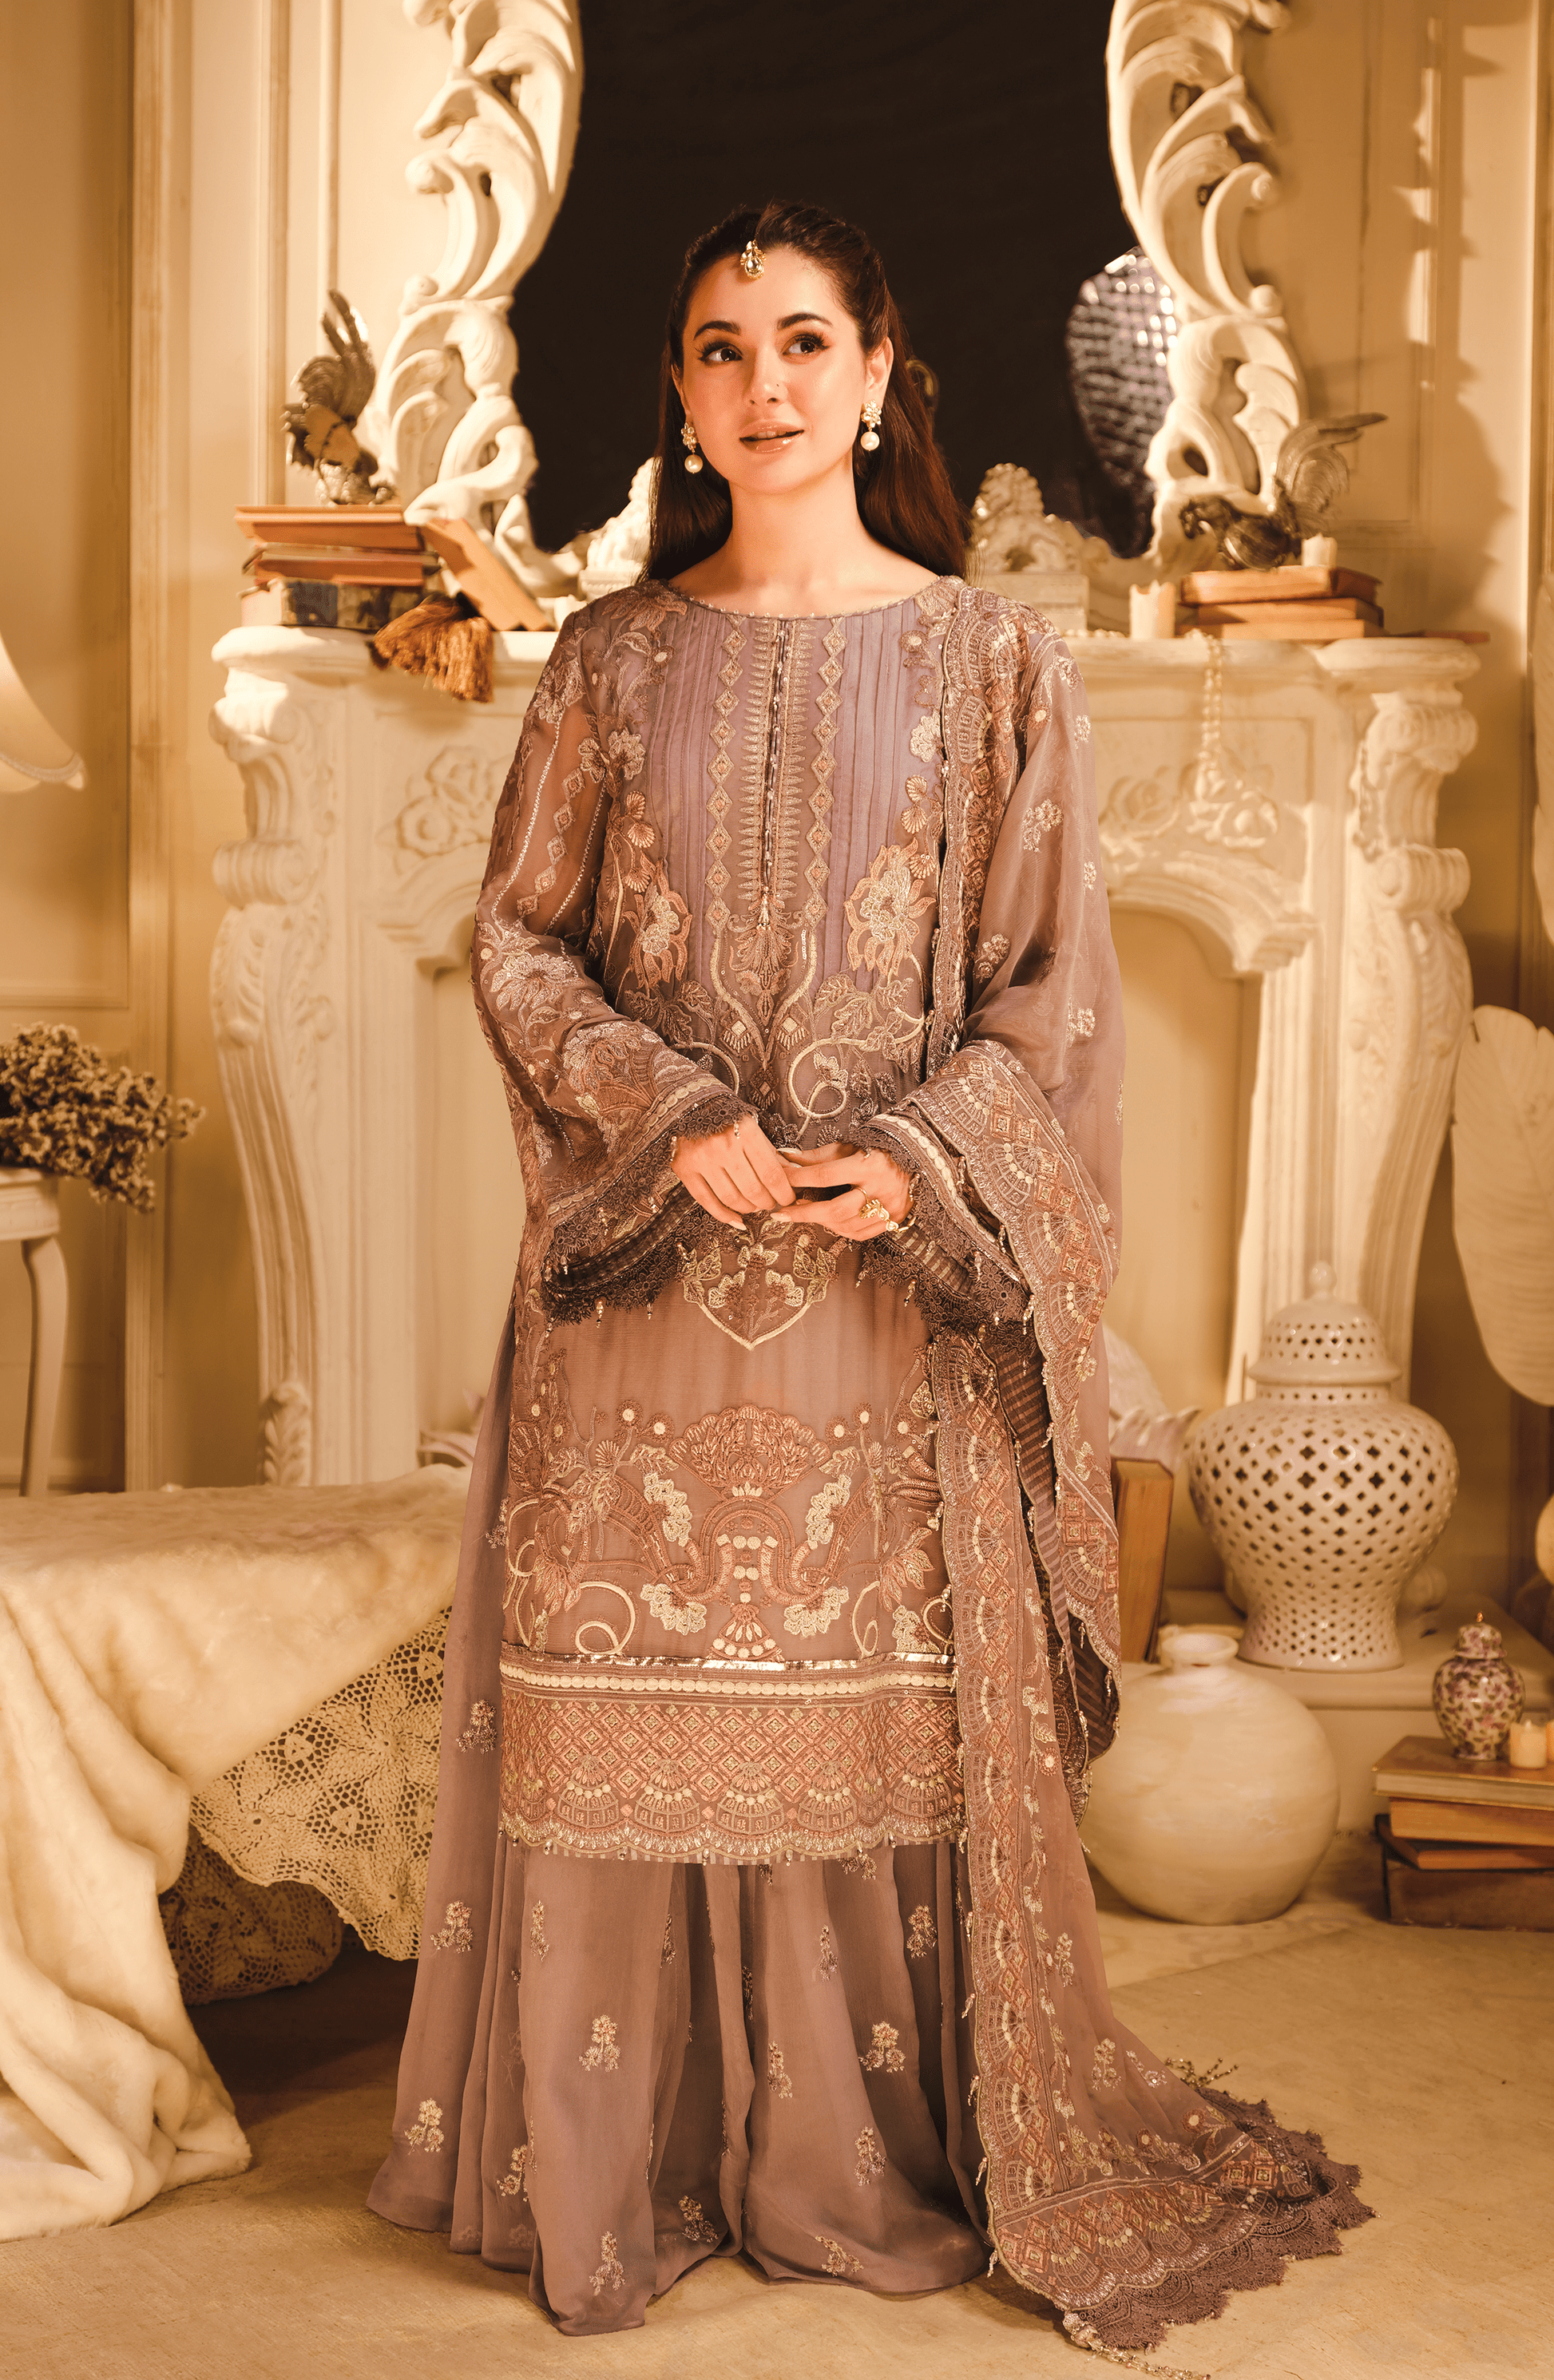 HSY Luxury Pret | Suroor - Embroidered Chiffon Ensemble (Unstitched)